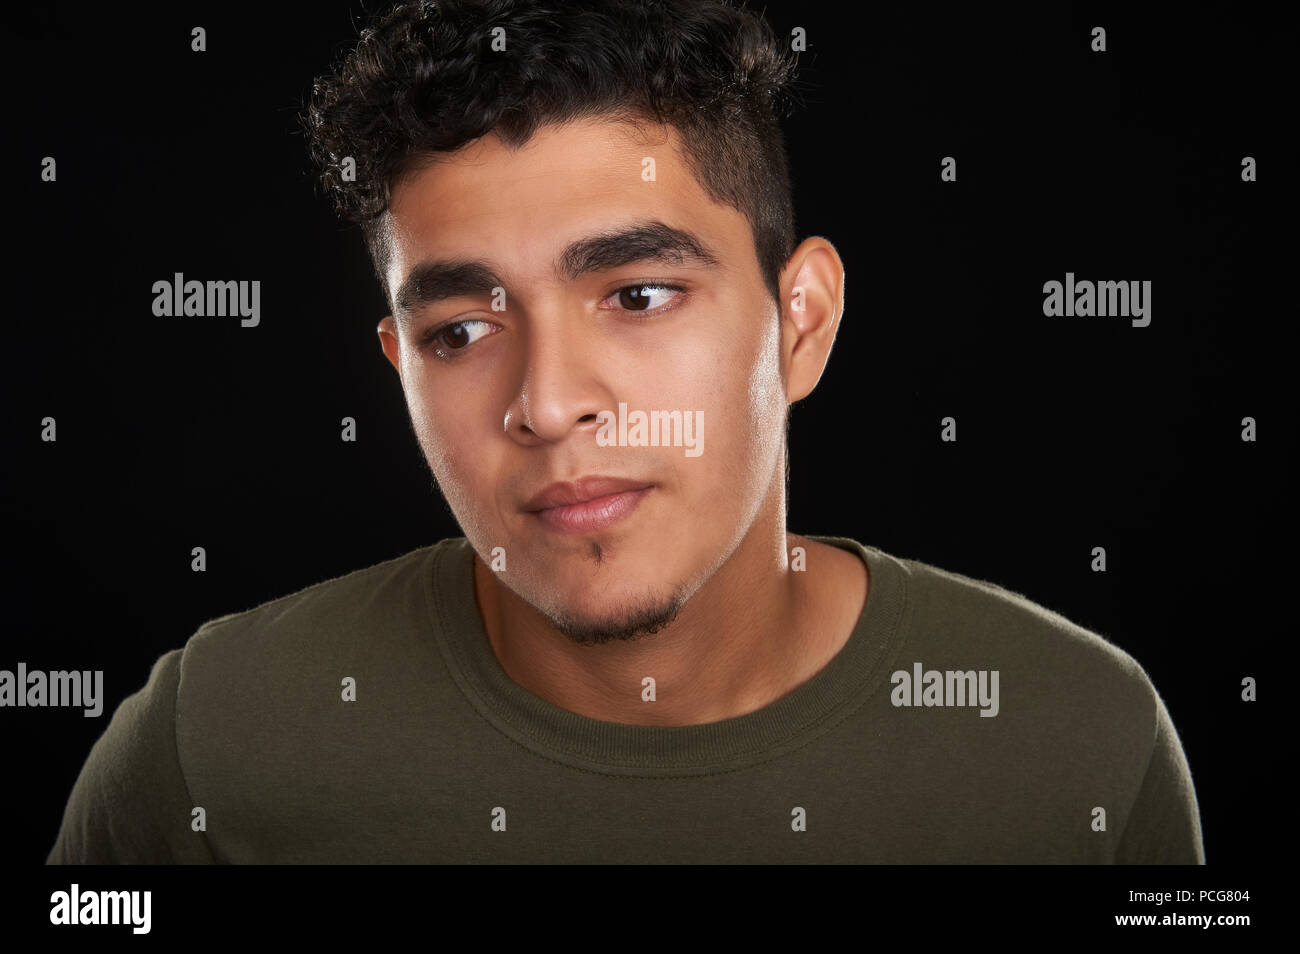 Studio portrait of a 19 years old young man in an olive t-shirt, looking down, to the side Stock Photo